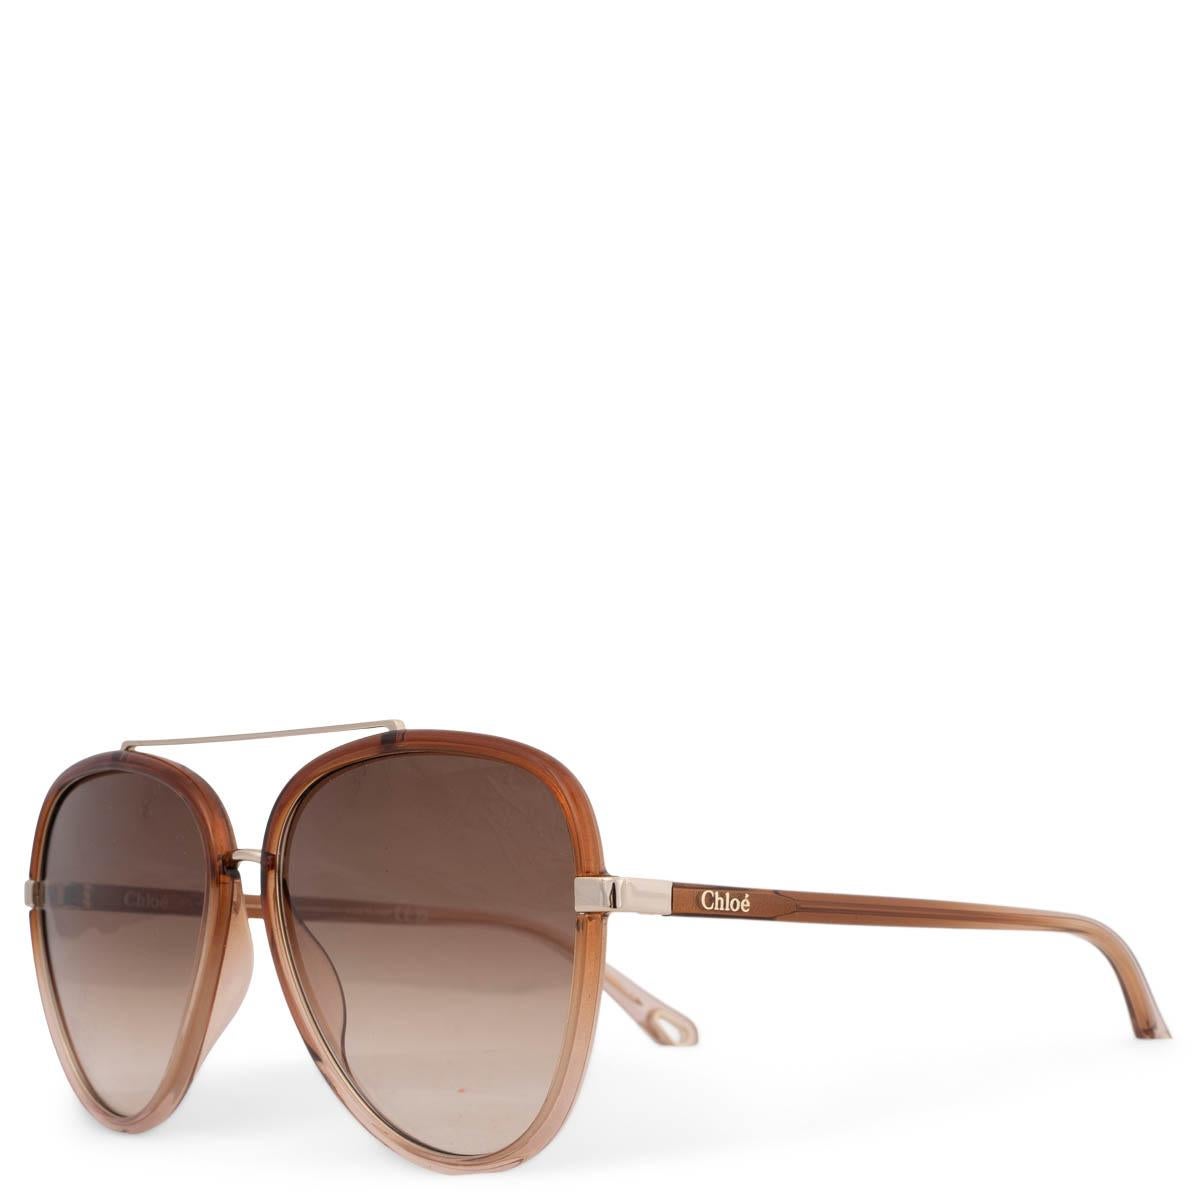 100% authentic Chloé 2022 aviator sunglasses in brown transparent acetate. Feature gold-tone metal details and gradient brown lenses.Have been worn and are in excellent condition. Comes with case.

Measurements
Model	CH0129S 002 58
Width	14cm